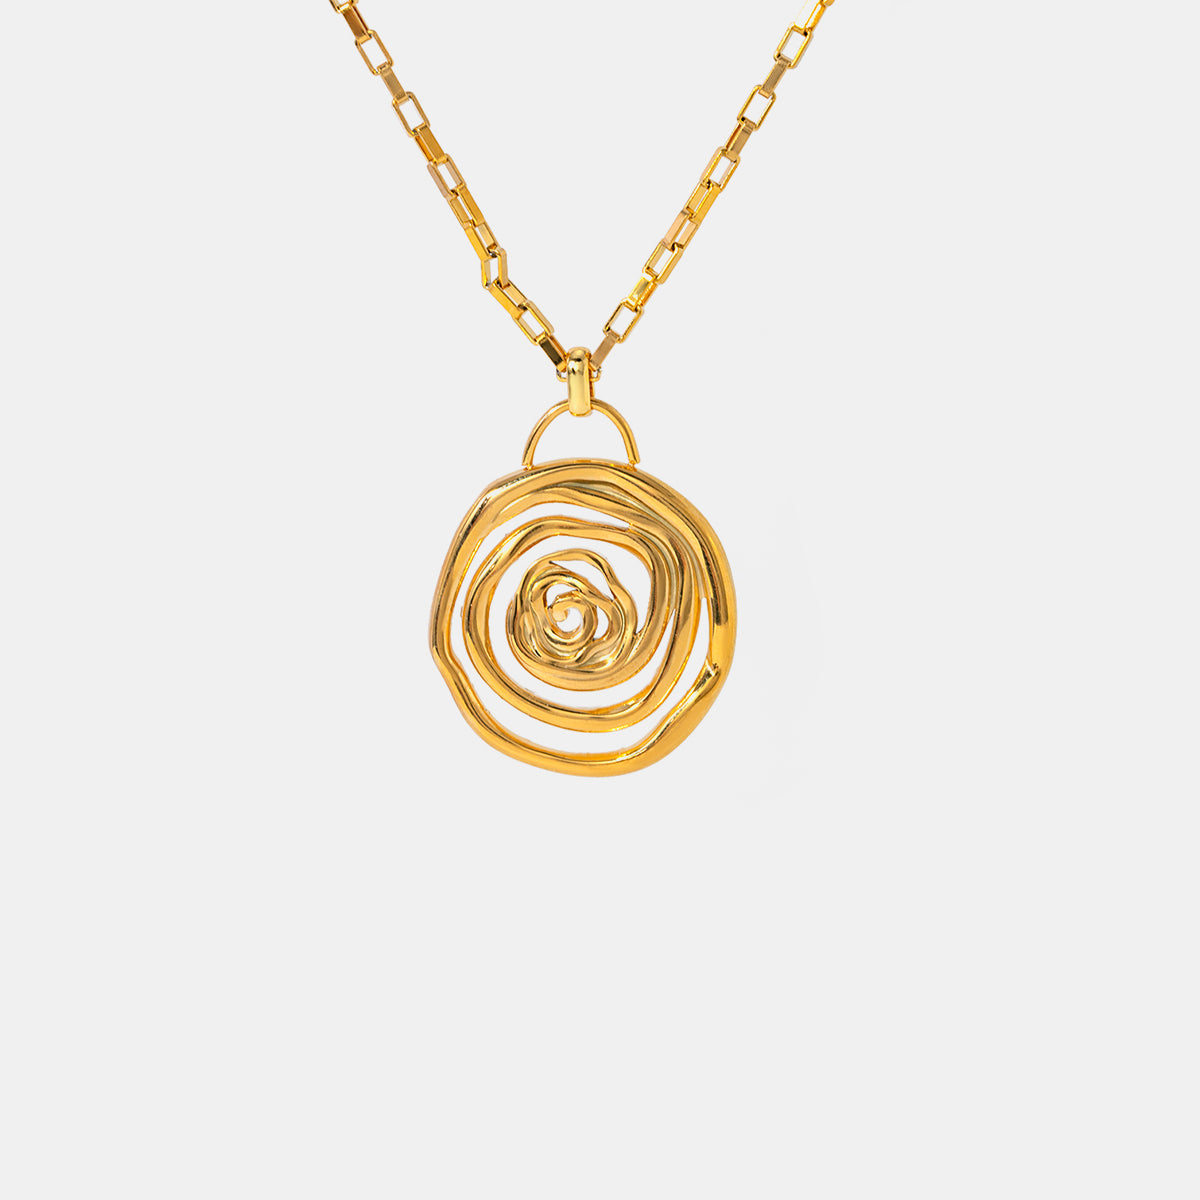 18K Gold-Plated Stainless Steel Spiral Pendant Necklace **FINAL SALE**